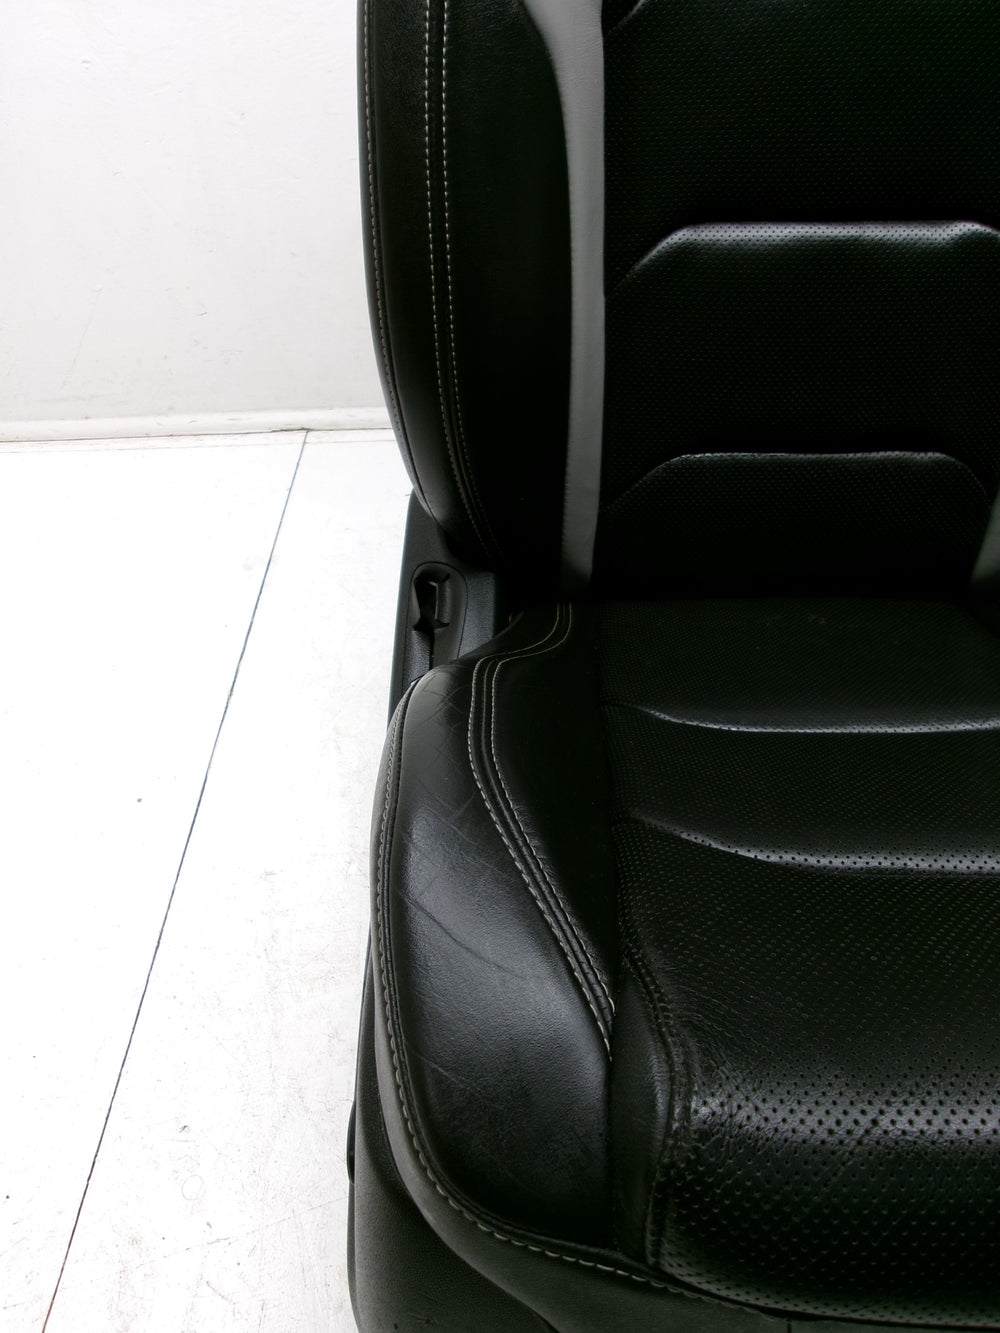 2016 - 2023 Chevy Camaro SS Seats Black Leather Heated Cooled 2SS #1426 | Picture # 8 | OEM Seats